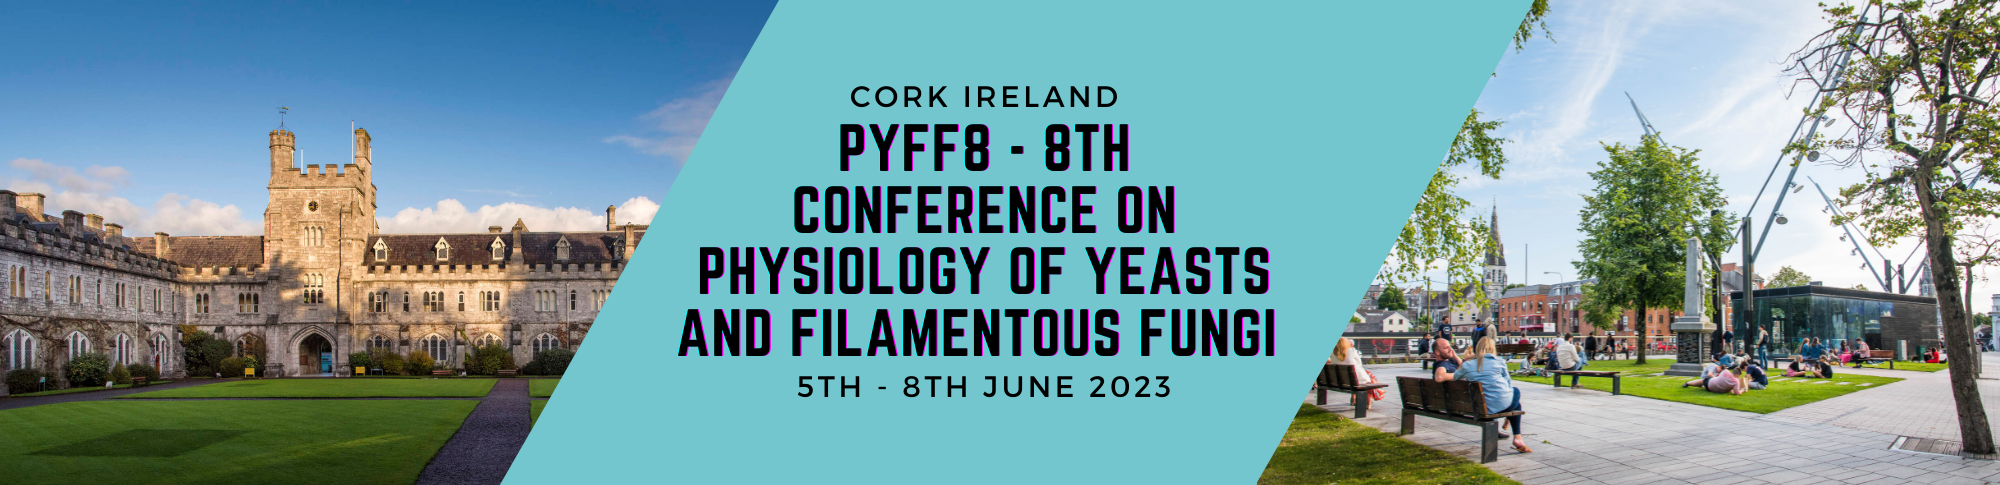 PYFF8 - 8th Conference on Physiology of yeasts and filamentous fungi